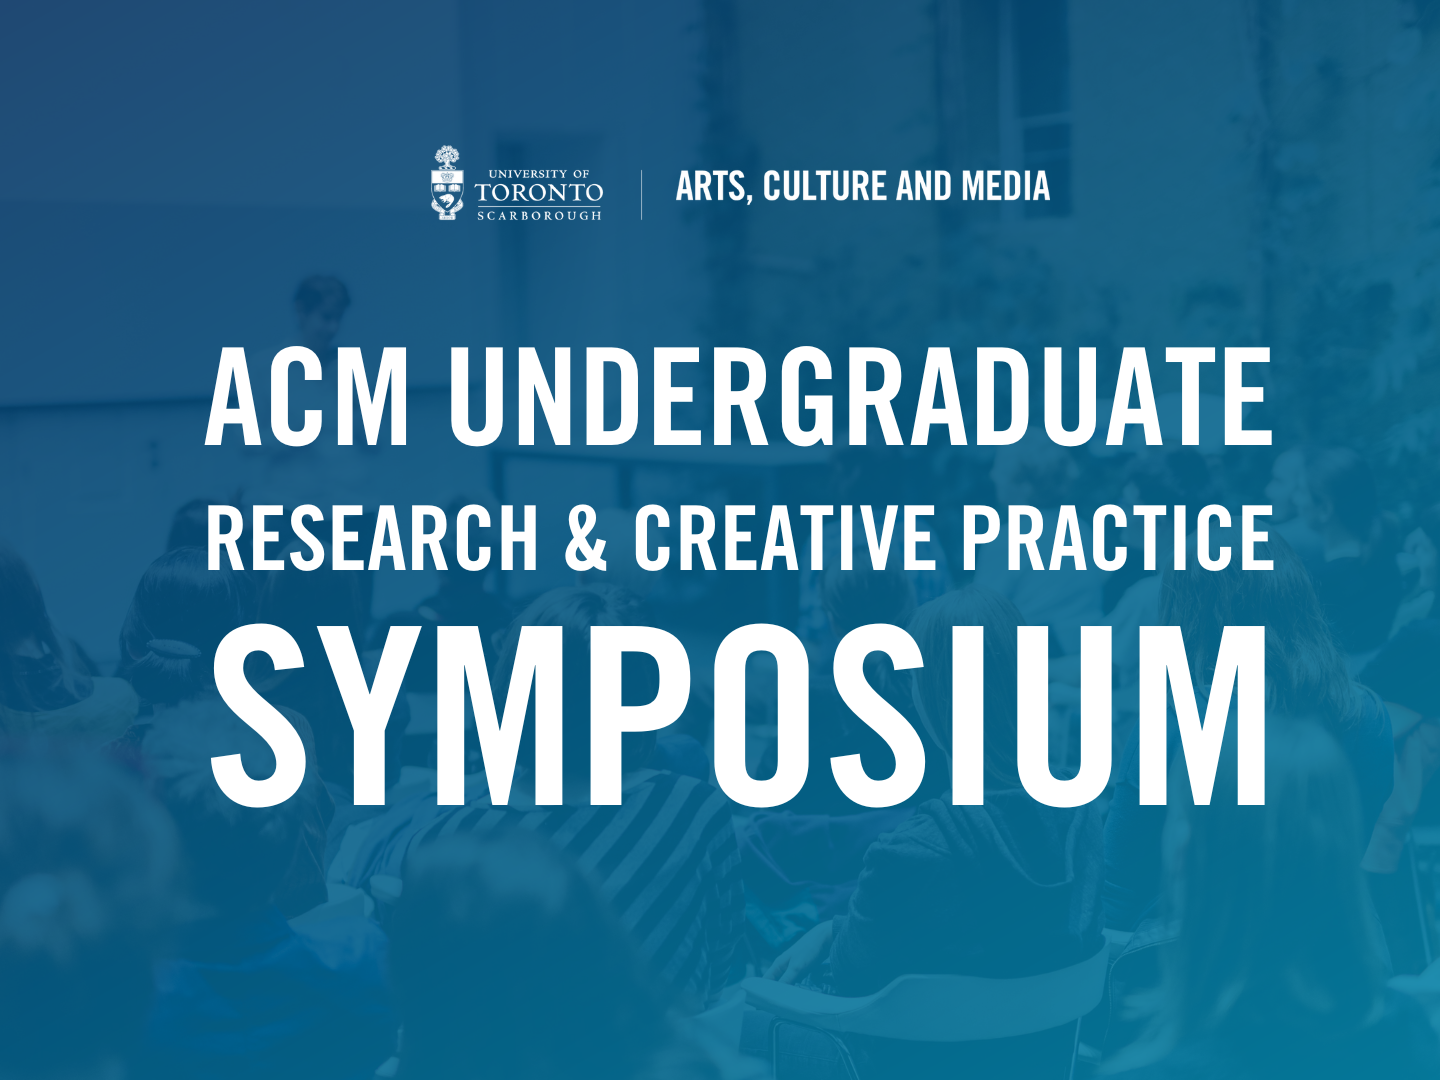 Banner of the symposium with white text of the title over a photograph of people in a lecture hall with a blue filter in the background.